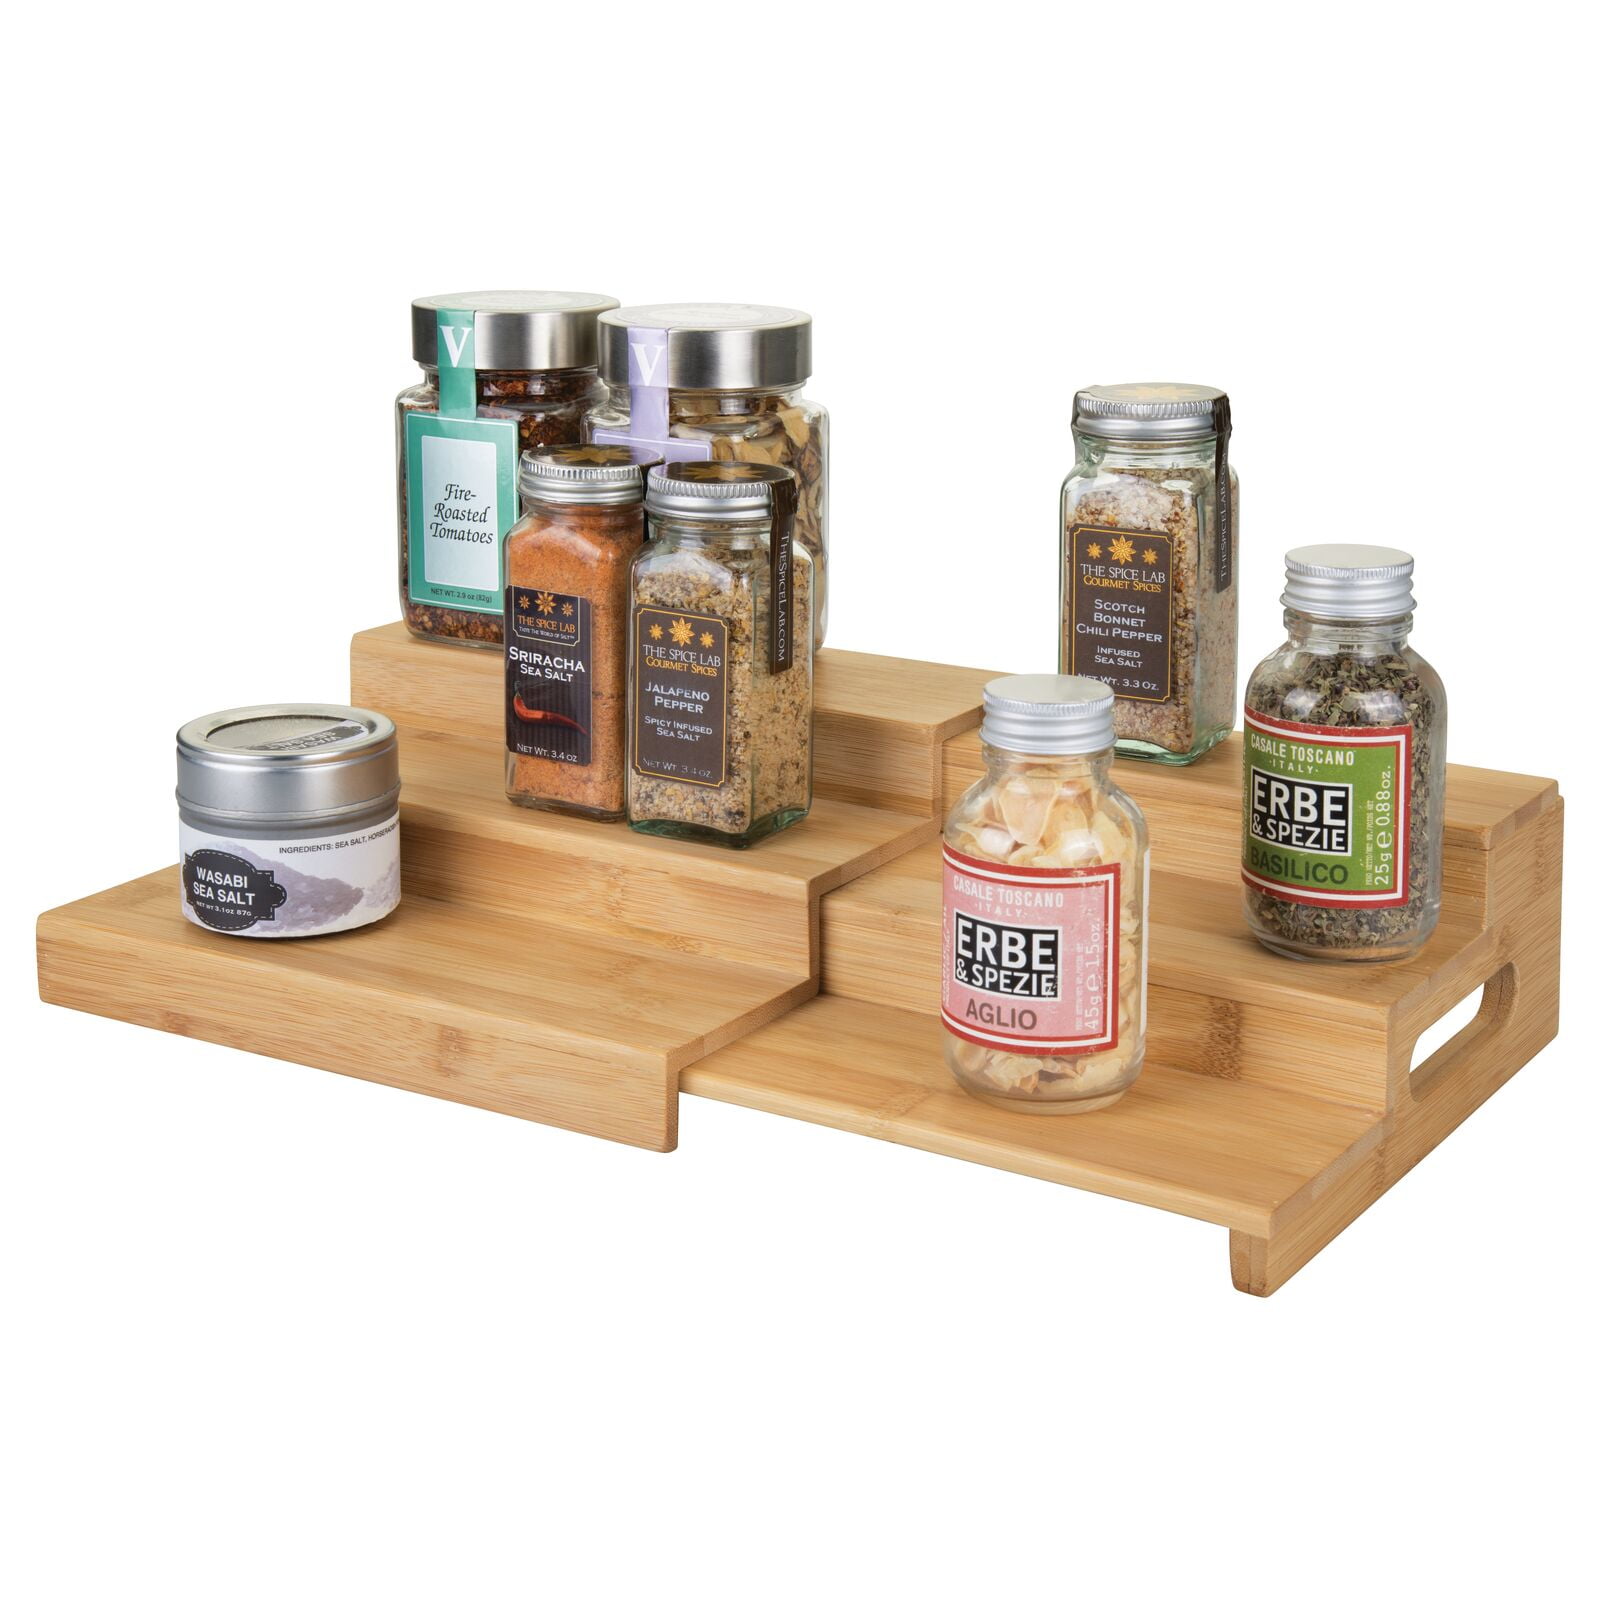 Restaurantware 12.5x9.75x4.25 inch Spice Shelf,1 Expandable Spice Step-3-Tier,For Kitchen Cabinets,Pantries,Countertops,Bathrooms,Natural Bamboo